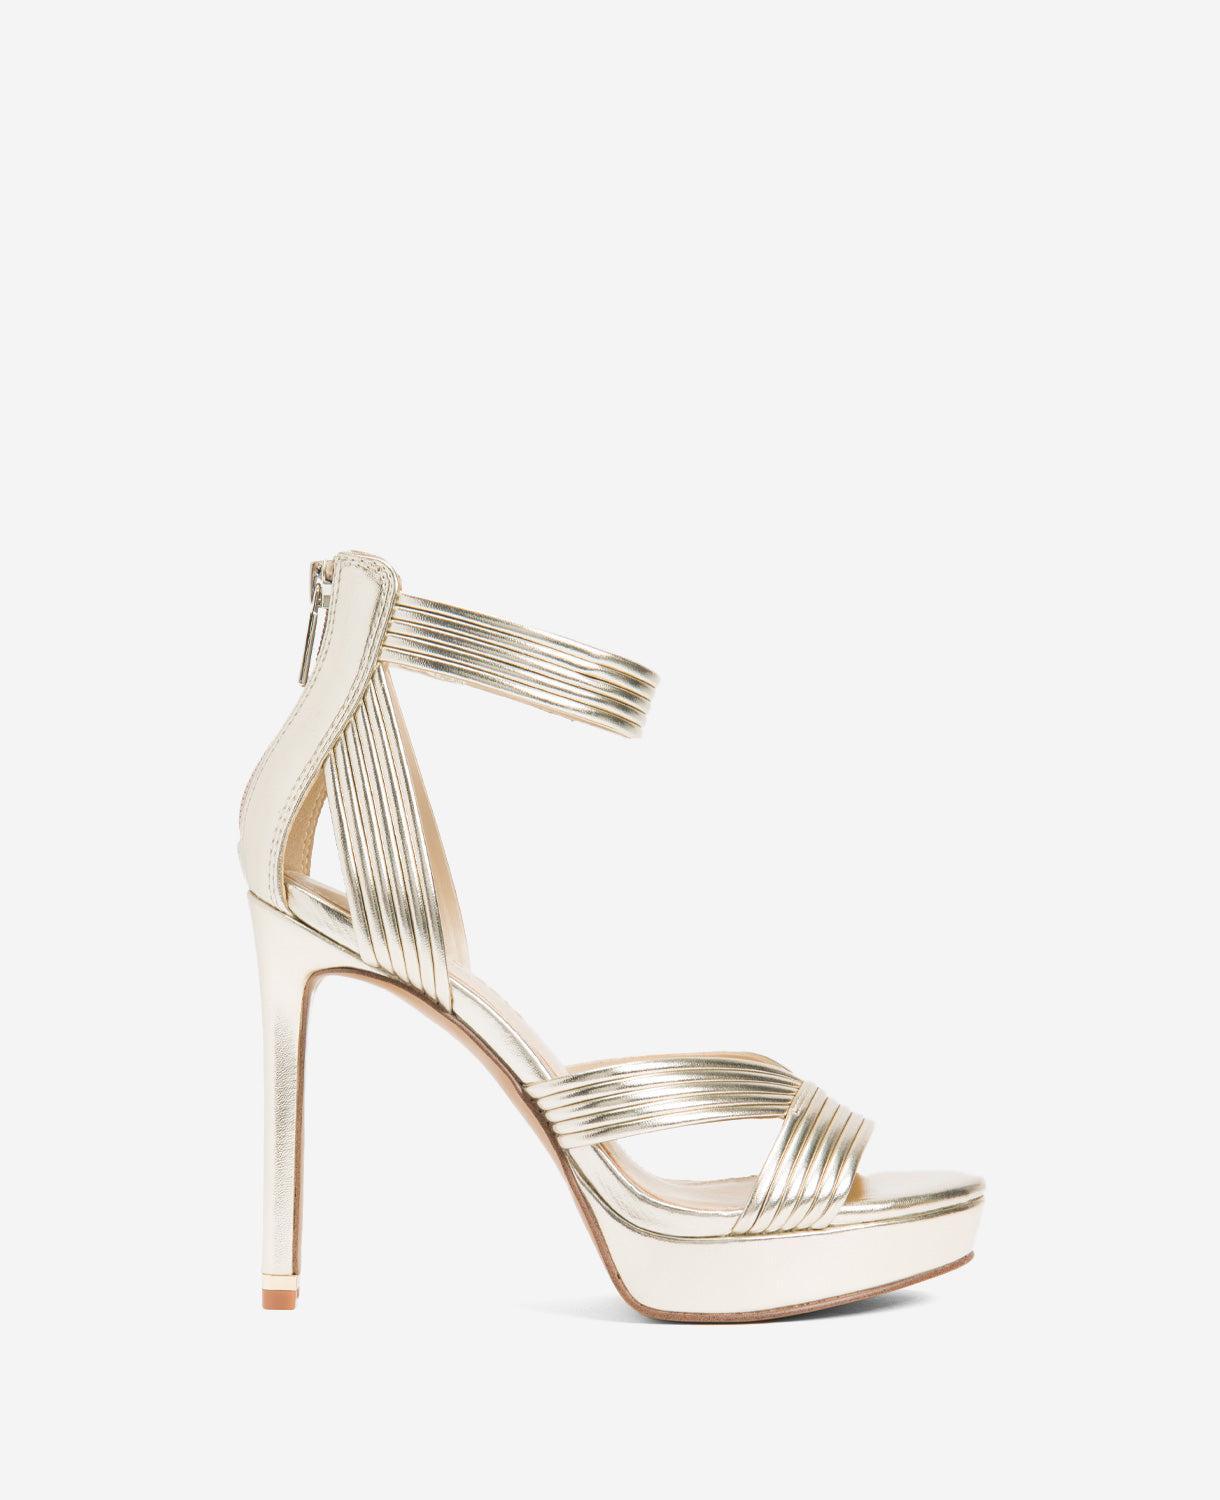 Kenneth Cole New York Womens Strappy Nadine Sandals Womens Shoes Product Image